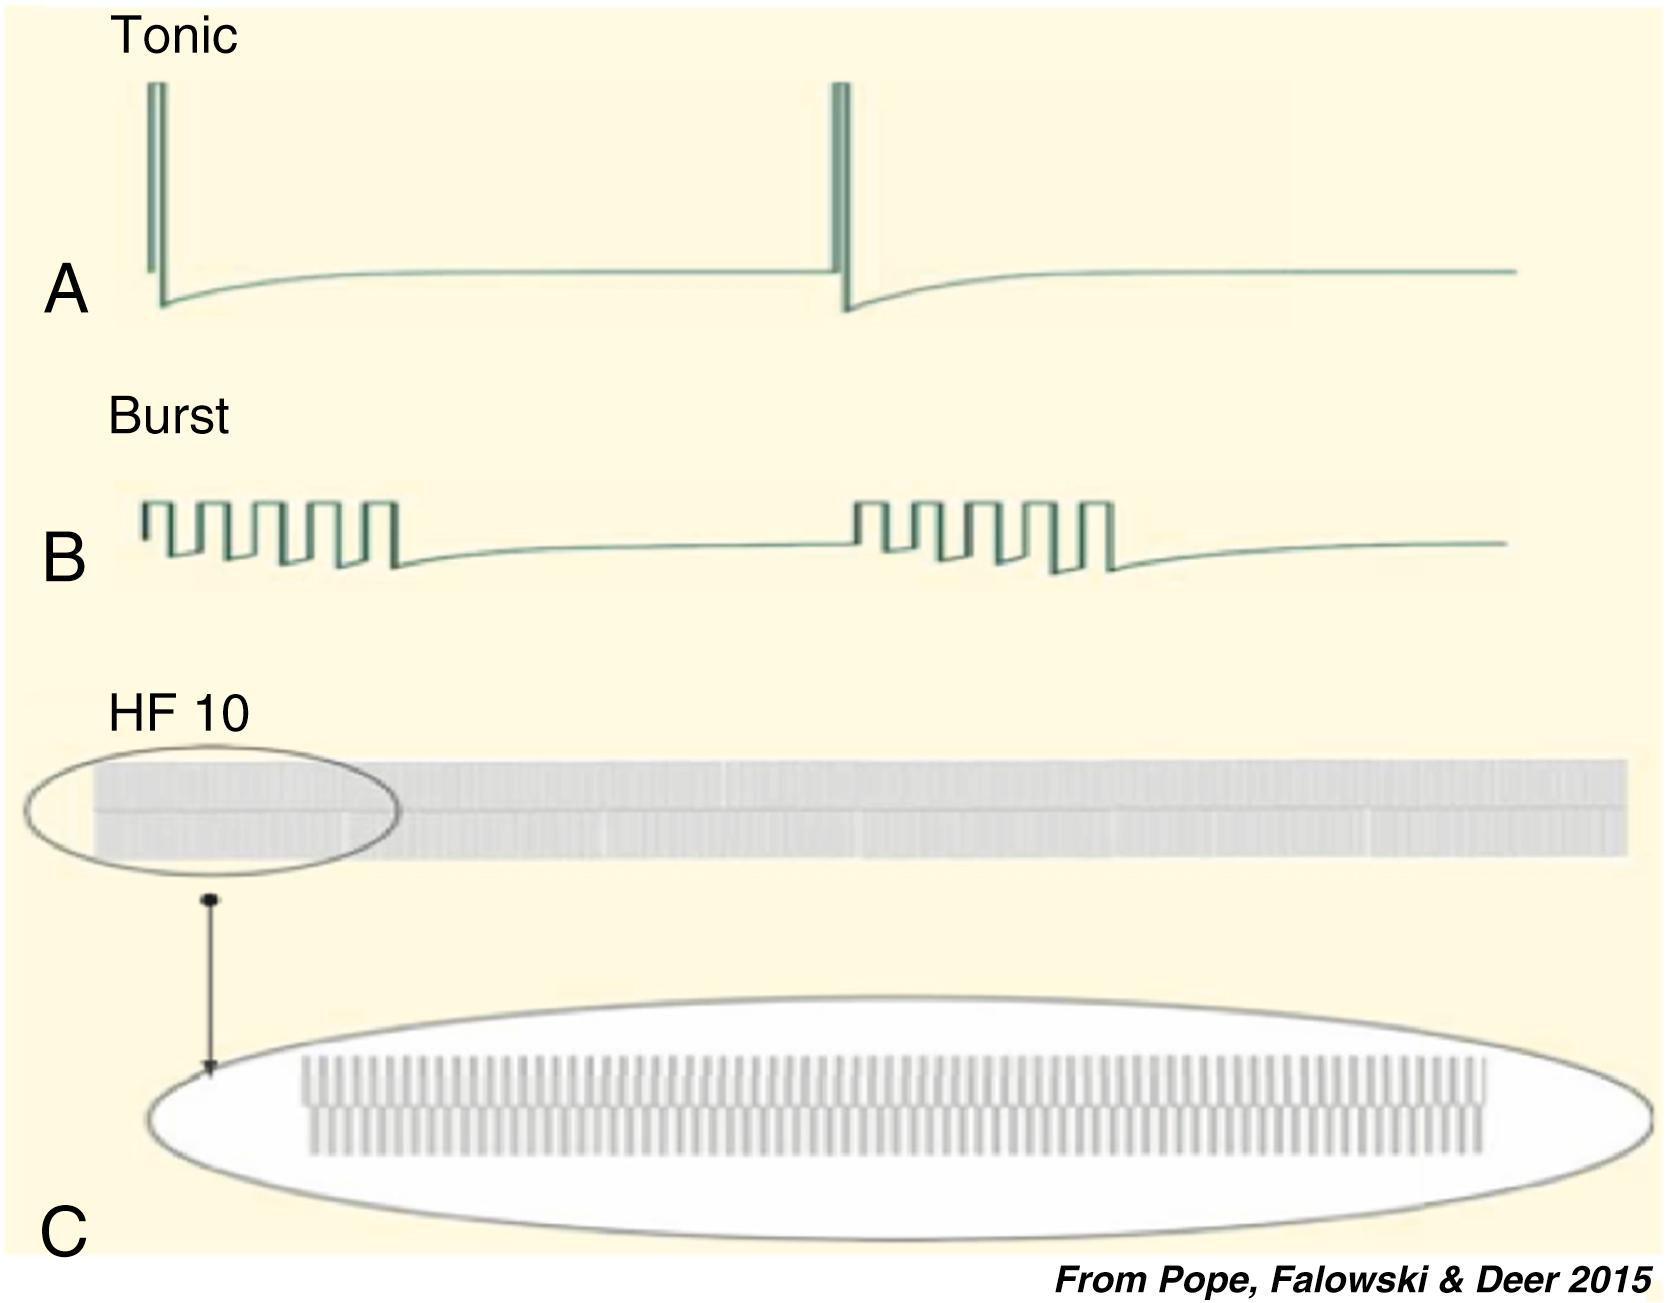 FIGURE 119.1, During the past decade, new spinal cord stimulation (SCS) waveforms have been introduced, supplementing or replacing conventional tonic stimulation (A). Among them are Burst SCS: with groups of five pulses (internal frequency 500 Hz) applied with a frequency of 40 Hz (B) and high-frequency stimulation (HF SCS) : with frequencies up to 10,000 Hz (10 KHz) (C).